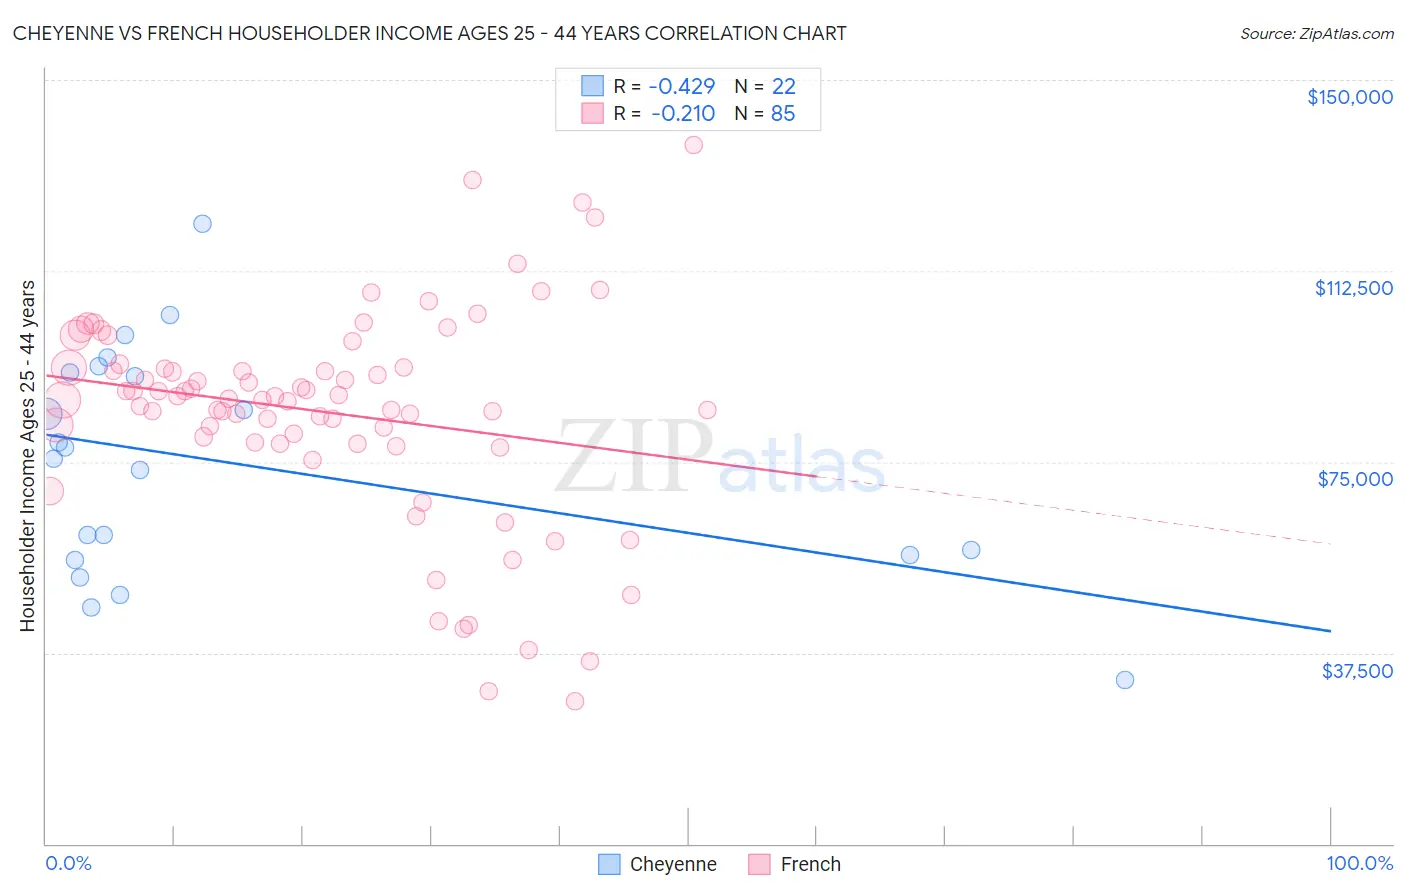 Cheyenne vs French Householder Income Ages 25 - 44 years